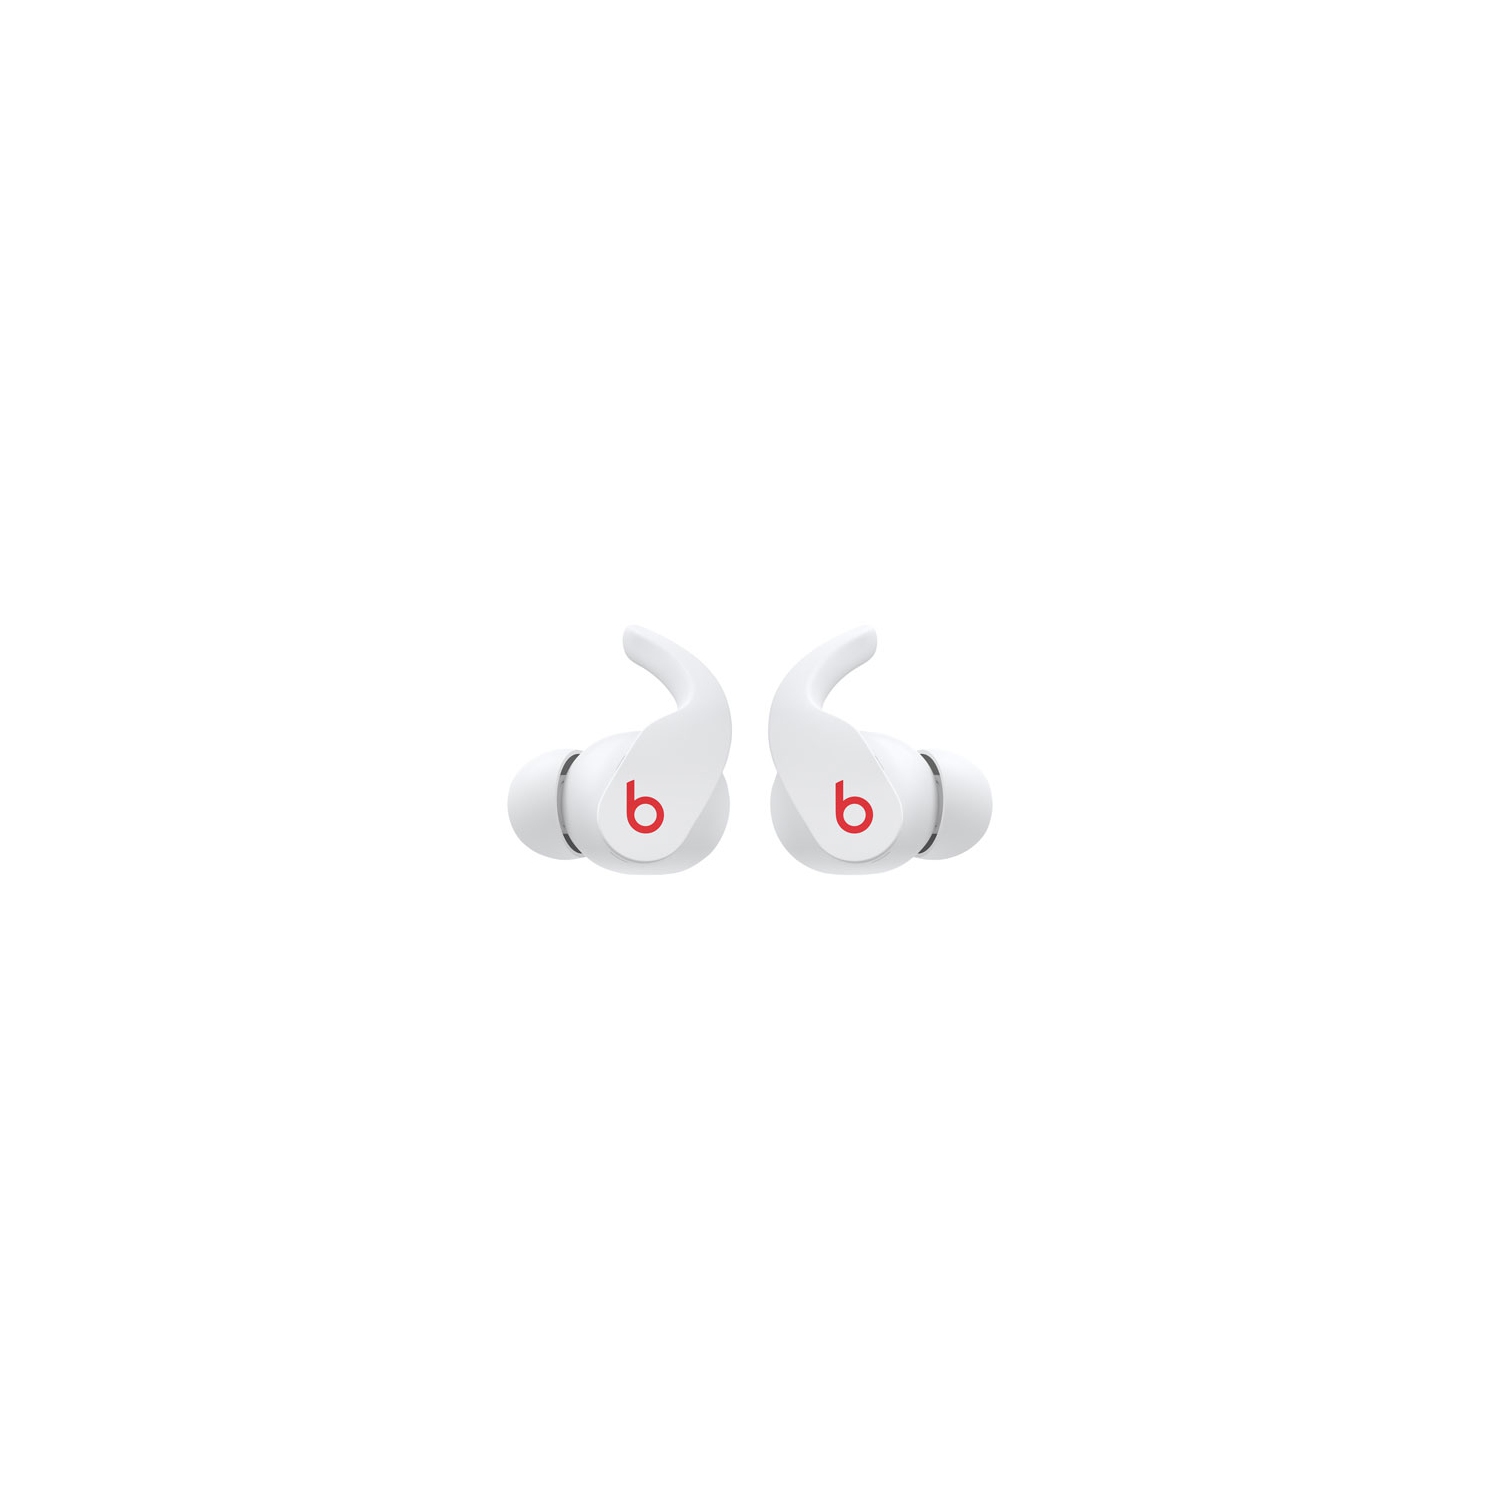 Refurbished (Good) - Beats By Dr. Dre Fit Pro In-Ear Noise Cancelling True Wireless Earbuds - White